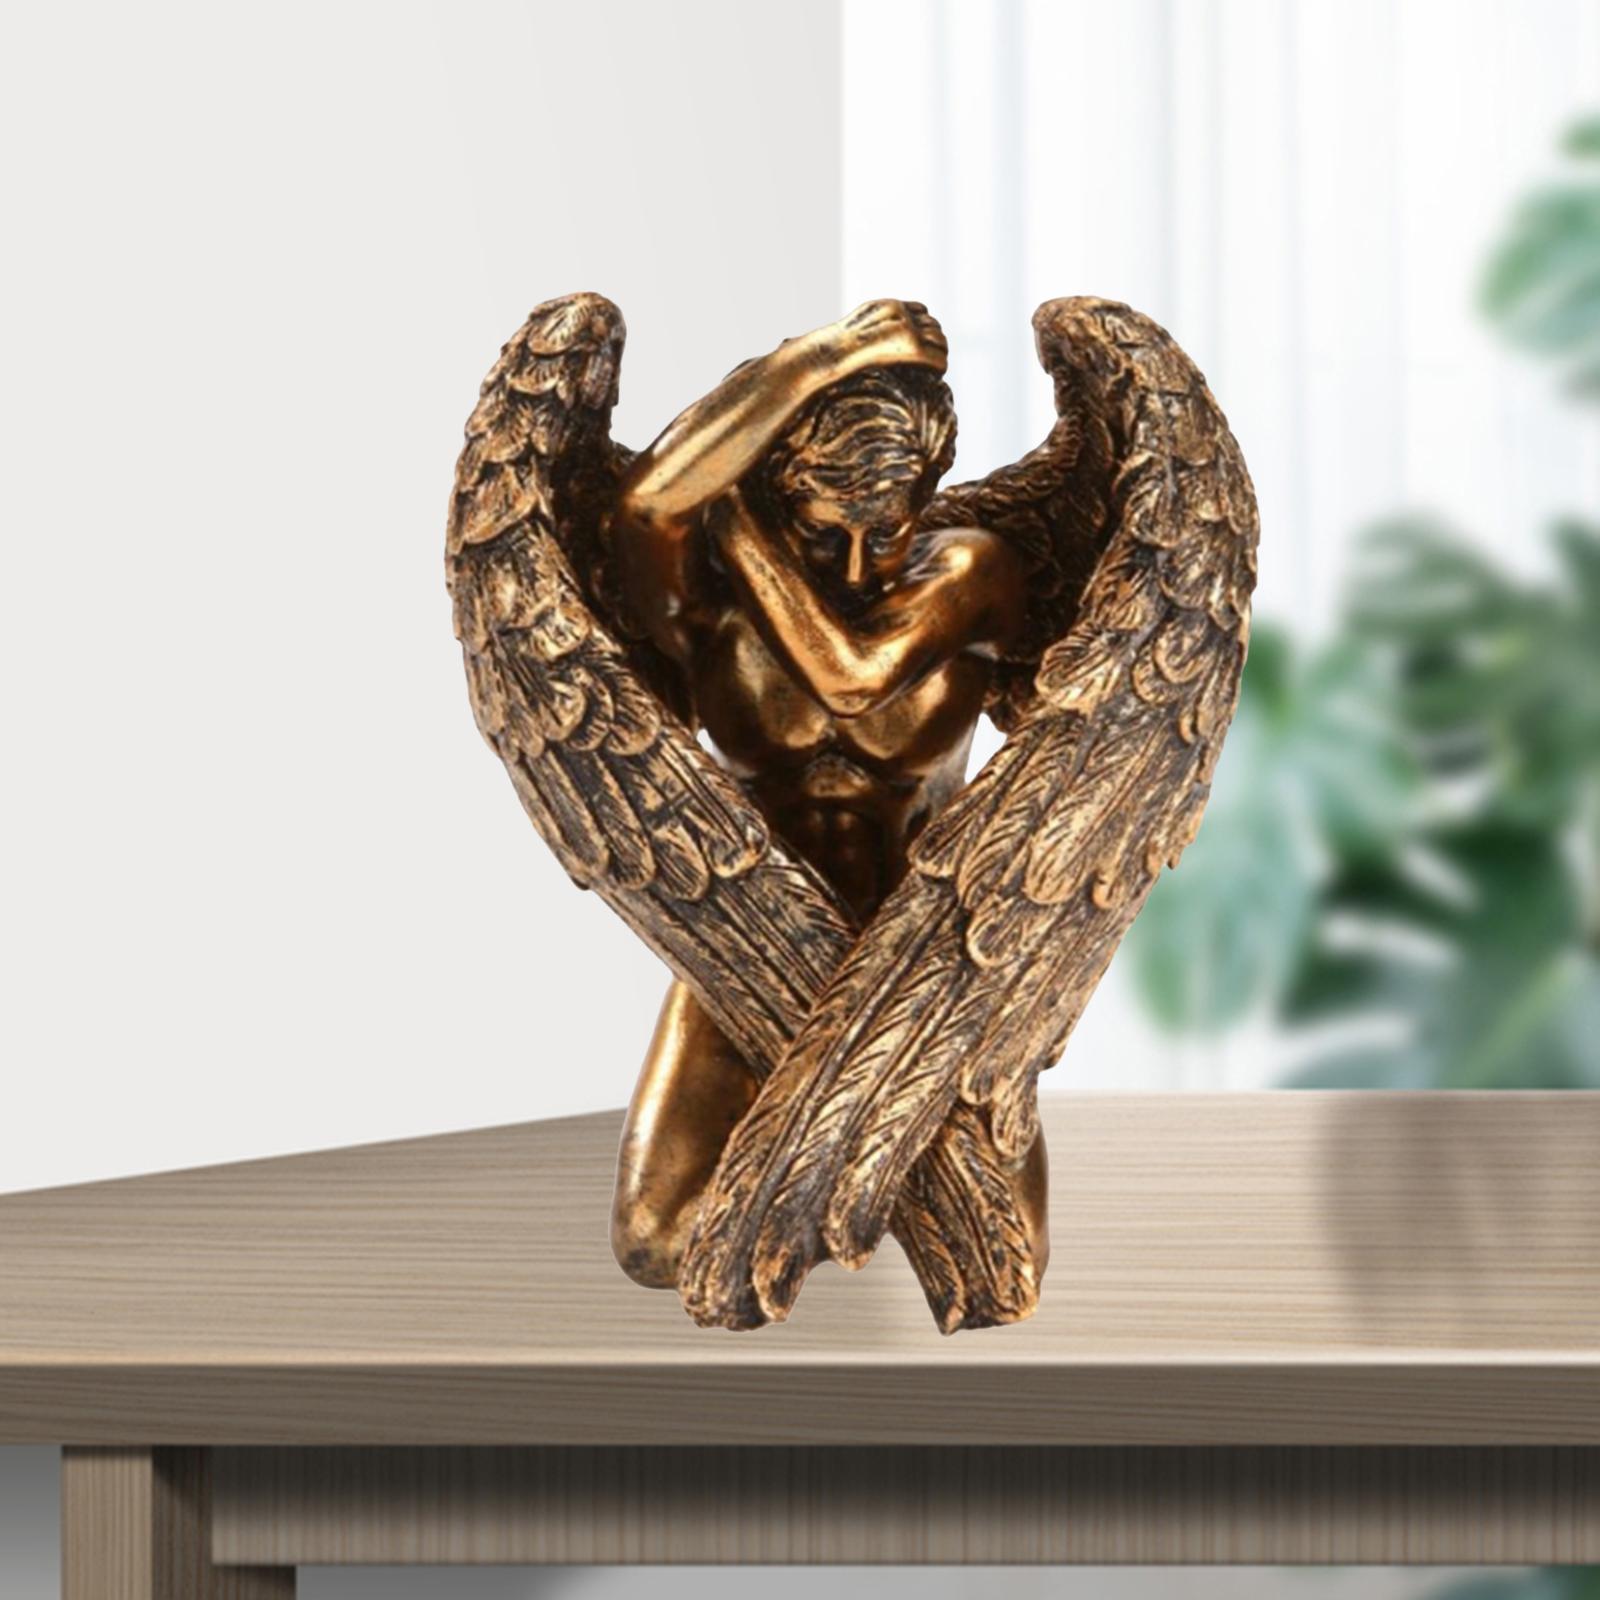 Creative Angel Wing Figure 3D Living Room Bedroom Home Office Decor Gifts Man